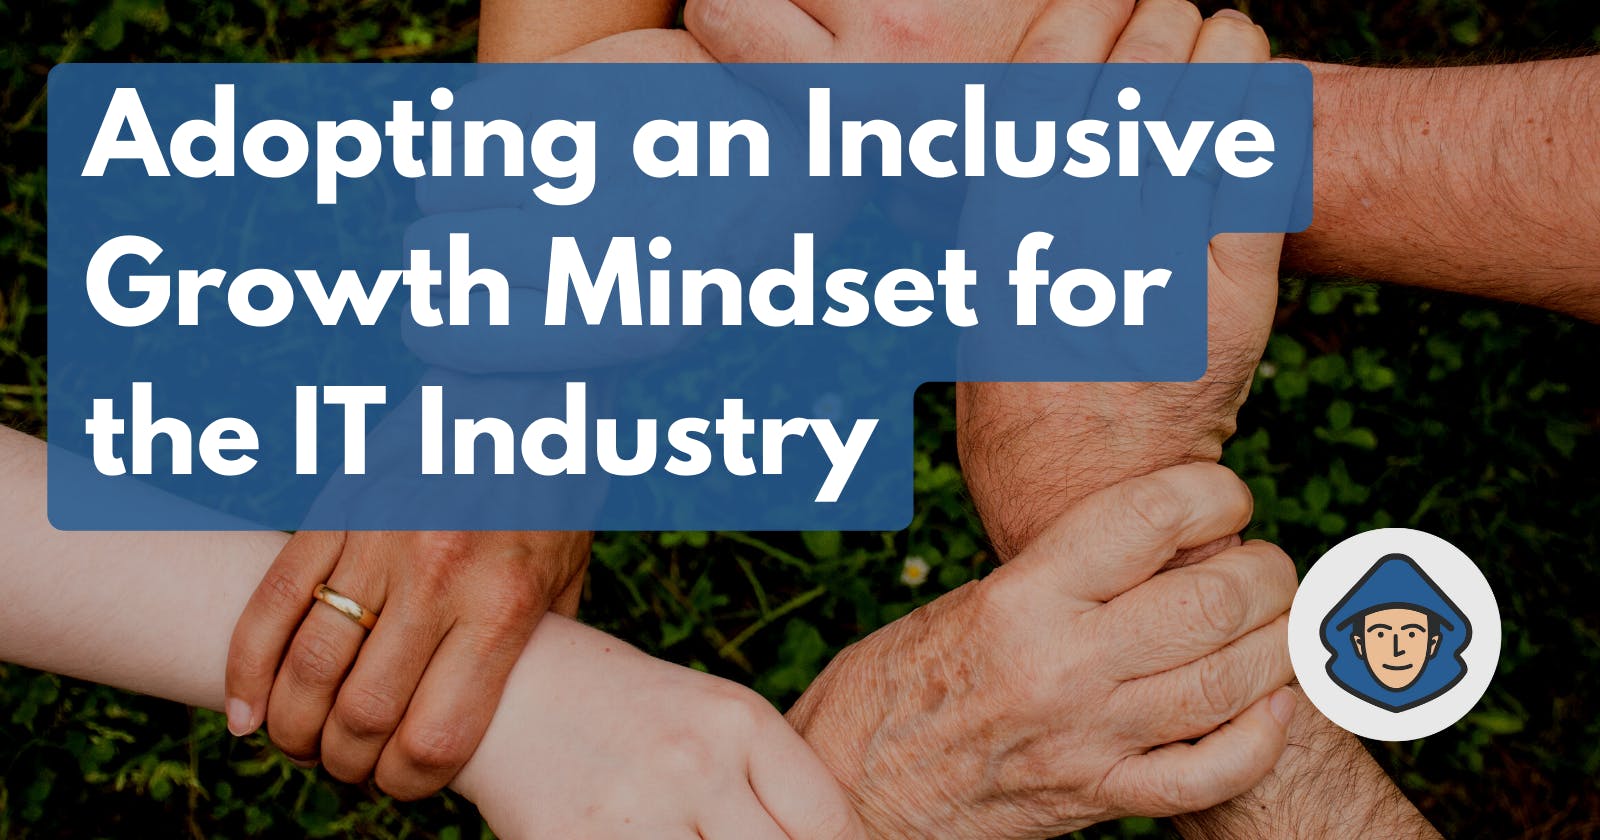 Adopting an Inclusive Growth Mindset for the IT Industry